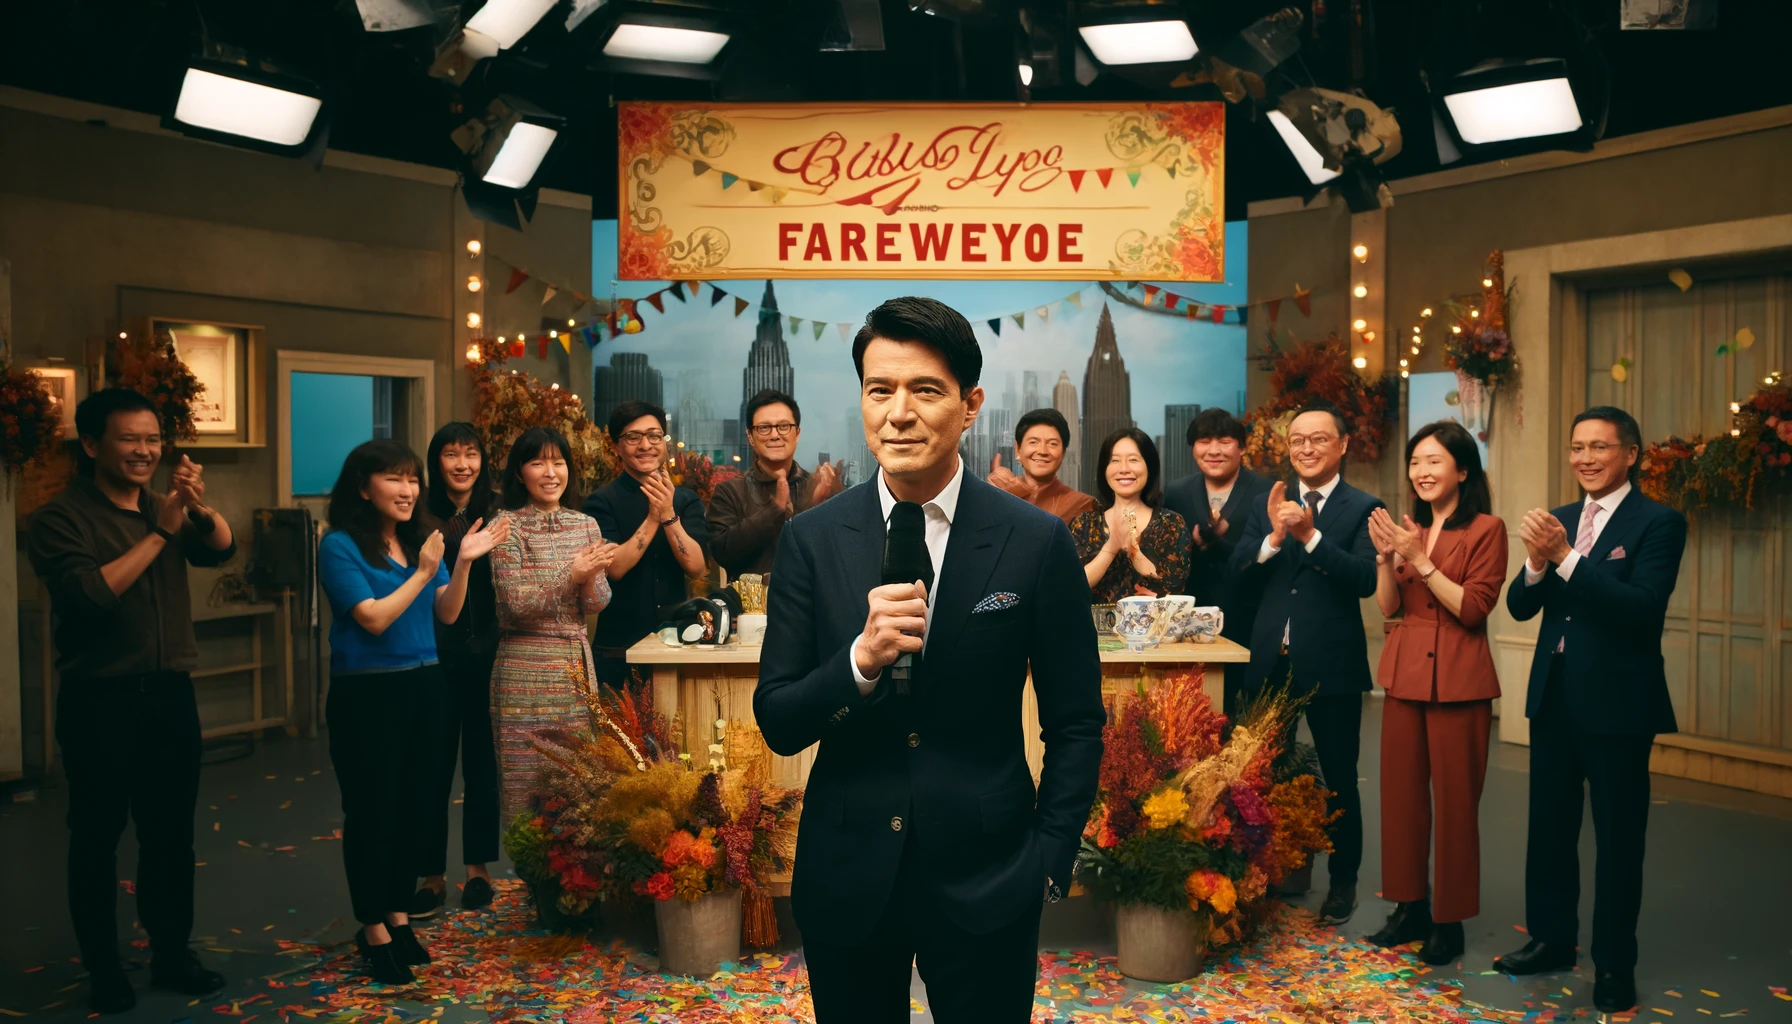 A lively television studio scene capturing the emotional moment of a popular TV shopping host's retirement. The studio is filled with vibrant decorations and a large farewell banner. The host, a middle-aged Asian man with short black hair, wears a smart suit and holds a microphone, surrounded by colleagues and a small audience clapping. The background features cameras and studio lights. The overall mood is bittersweet, with a touch of celebration.